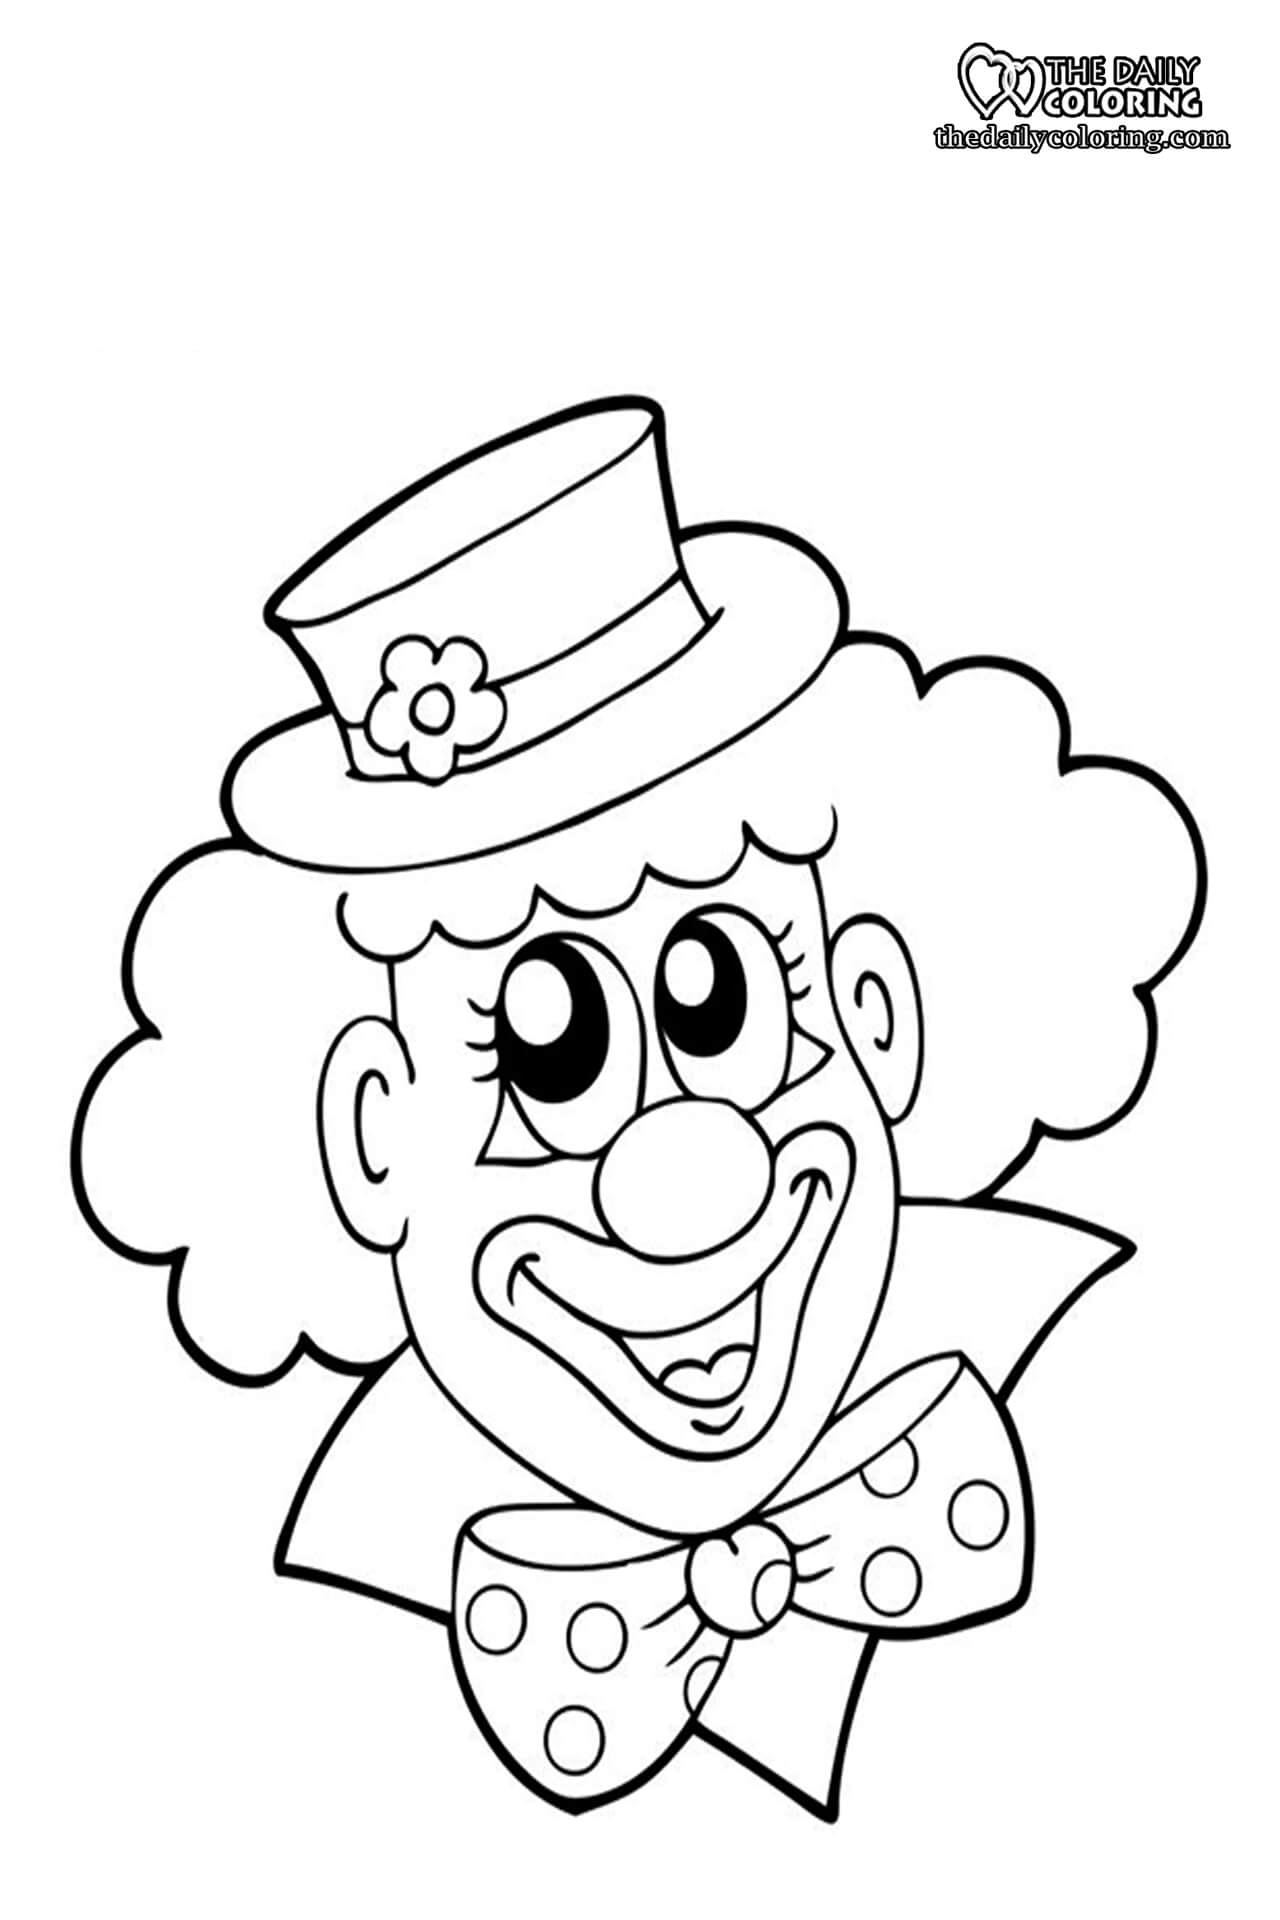 clown-coloring-pages